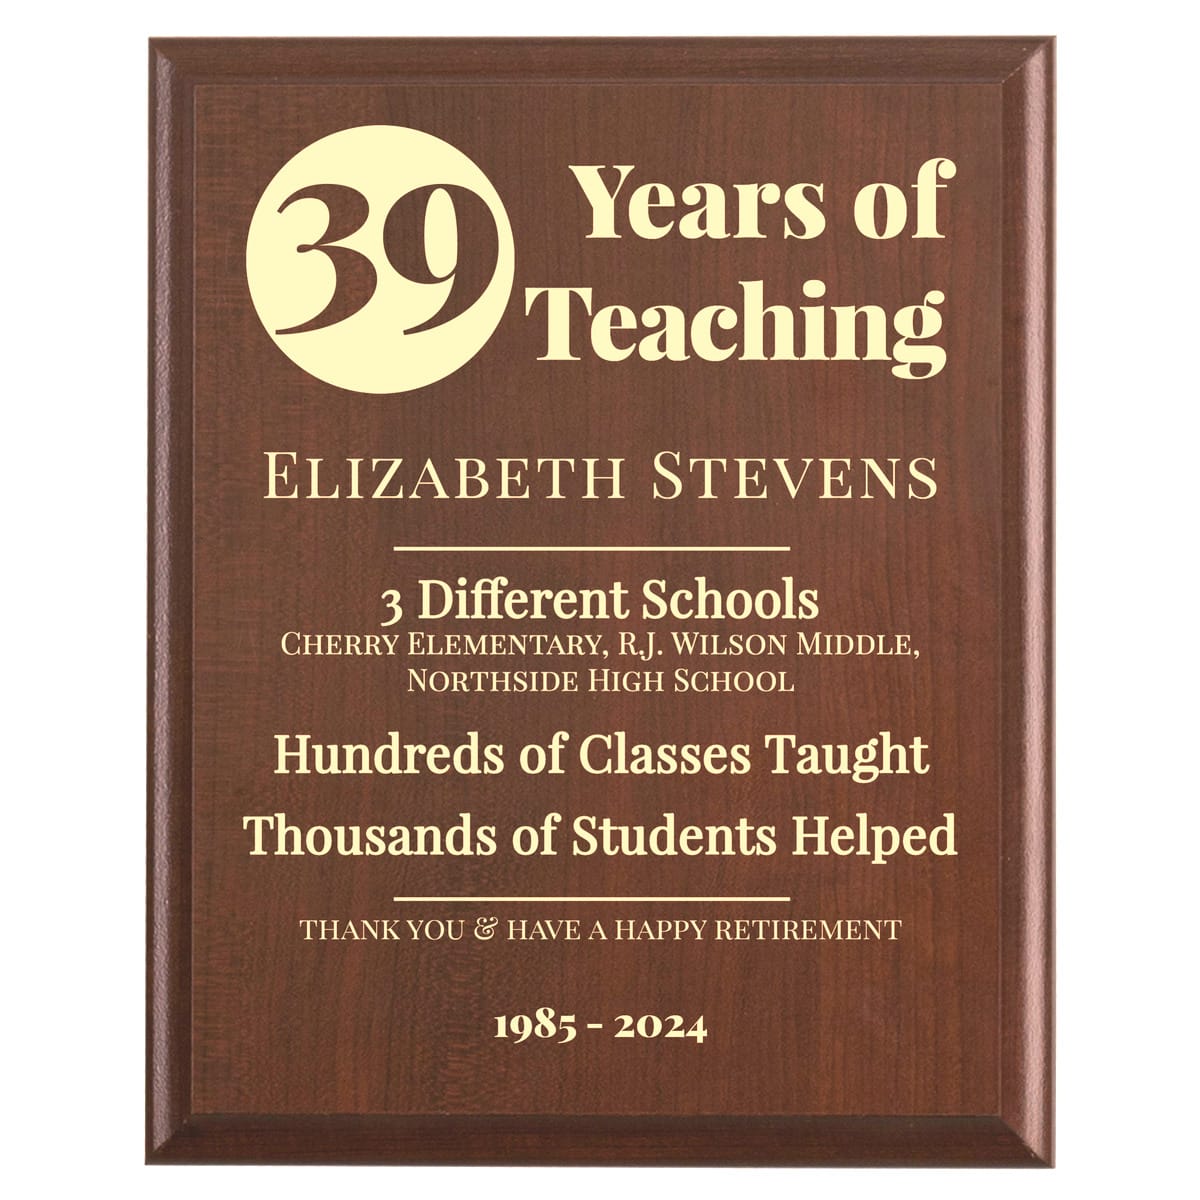 Plaque photo: Teacher Retirement Gift design with free personalization. Wood style finish with customized text.